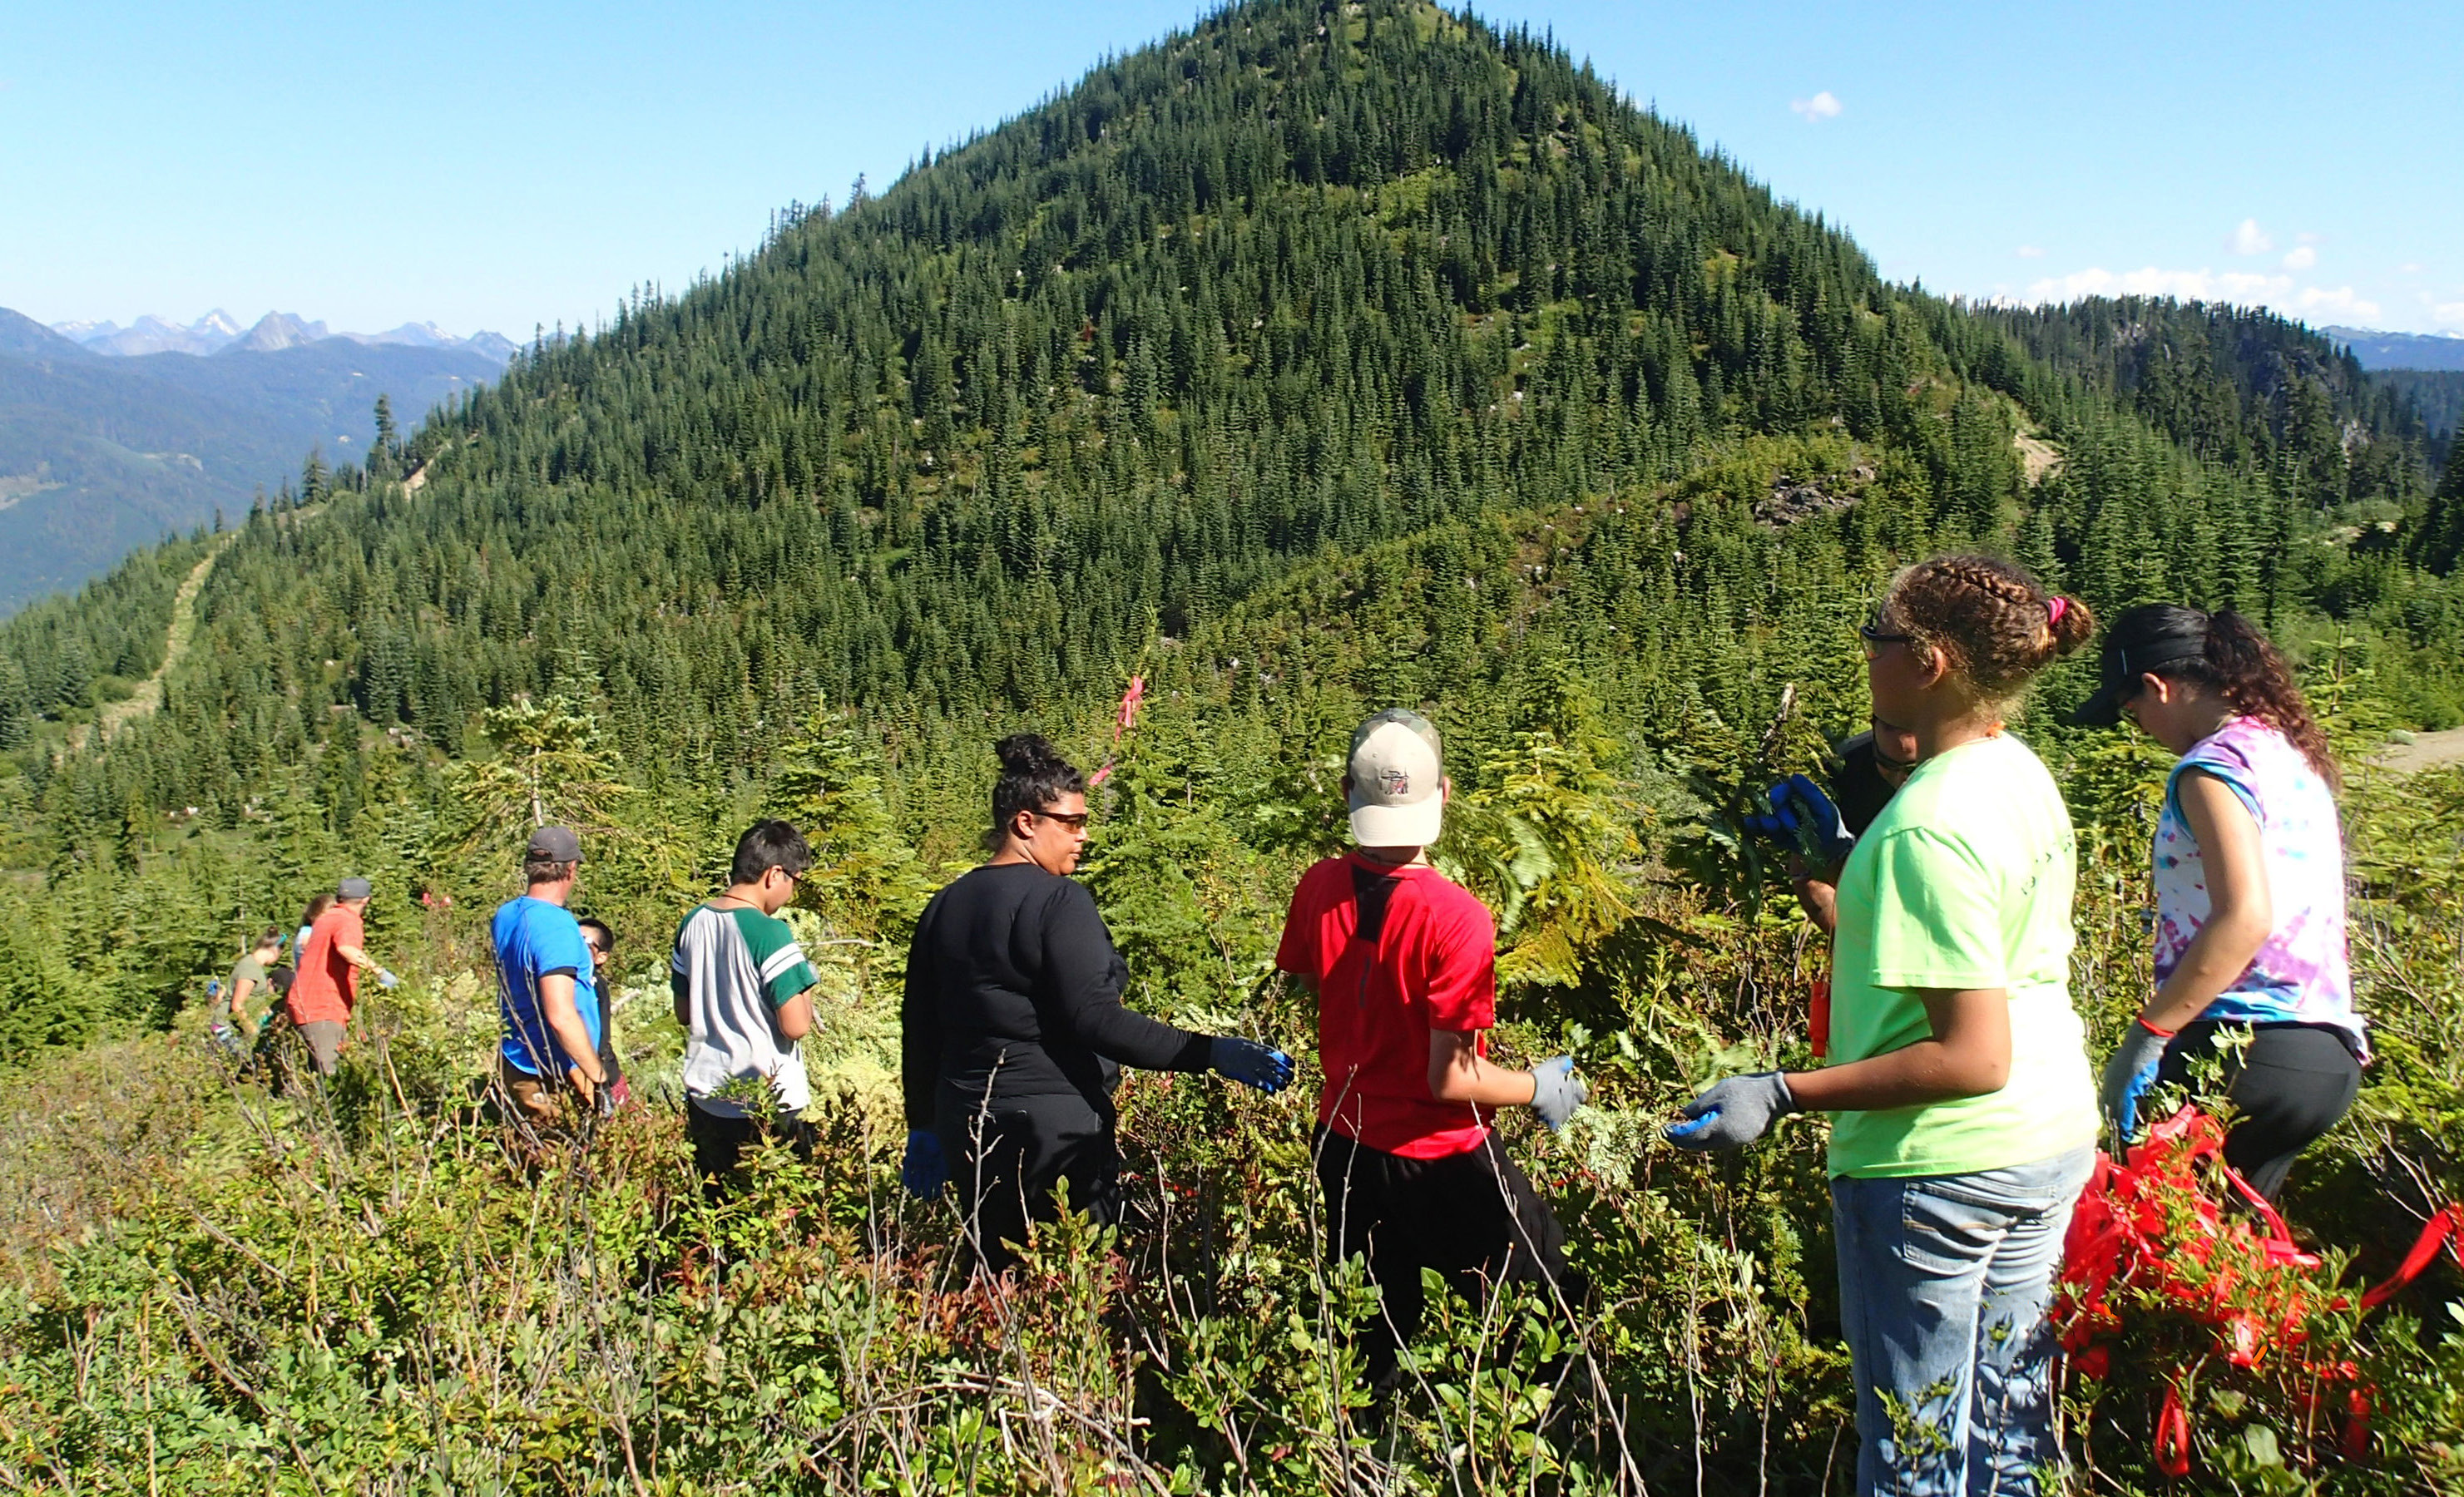 Tulalip Tribes preserve huckleberry grounds on ancestral territory in Washington